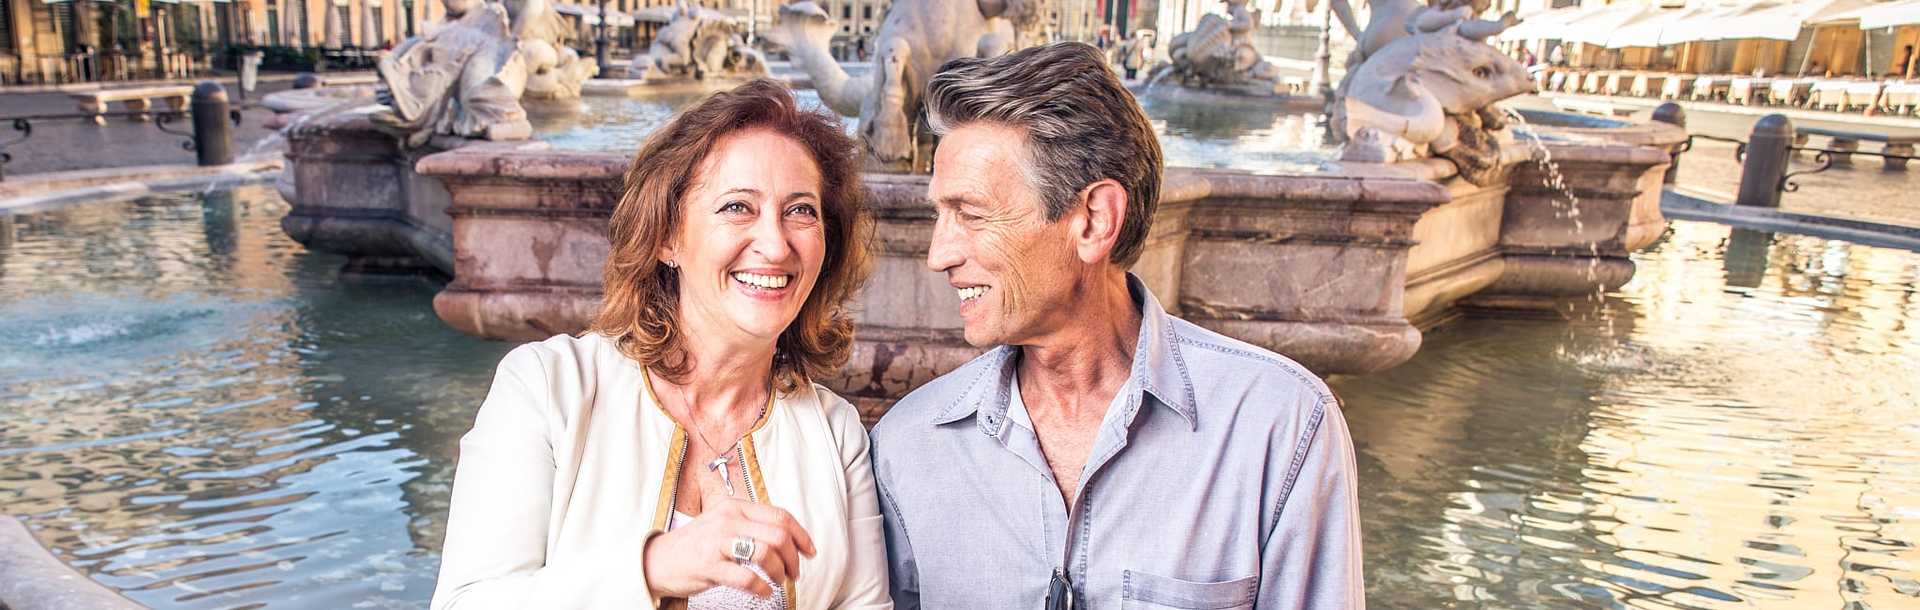 Senior couple on vacation in Rome, Italy